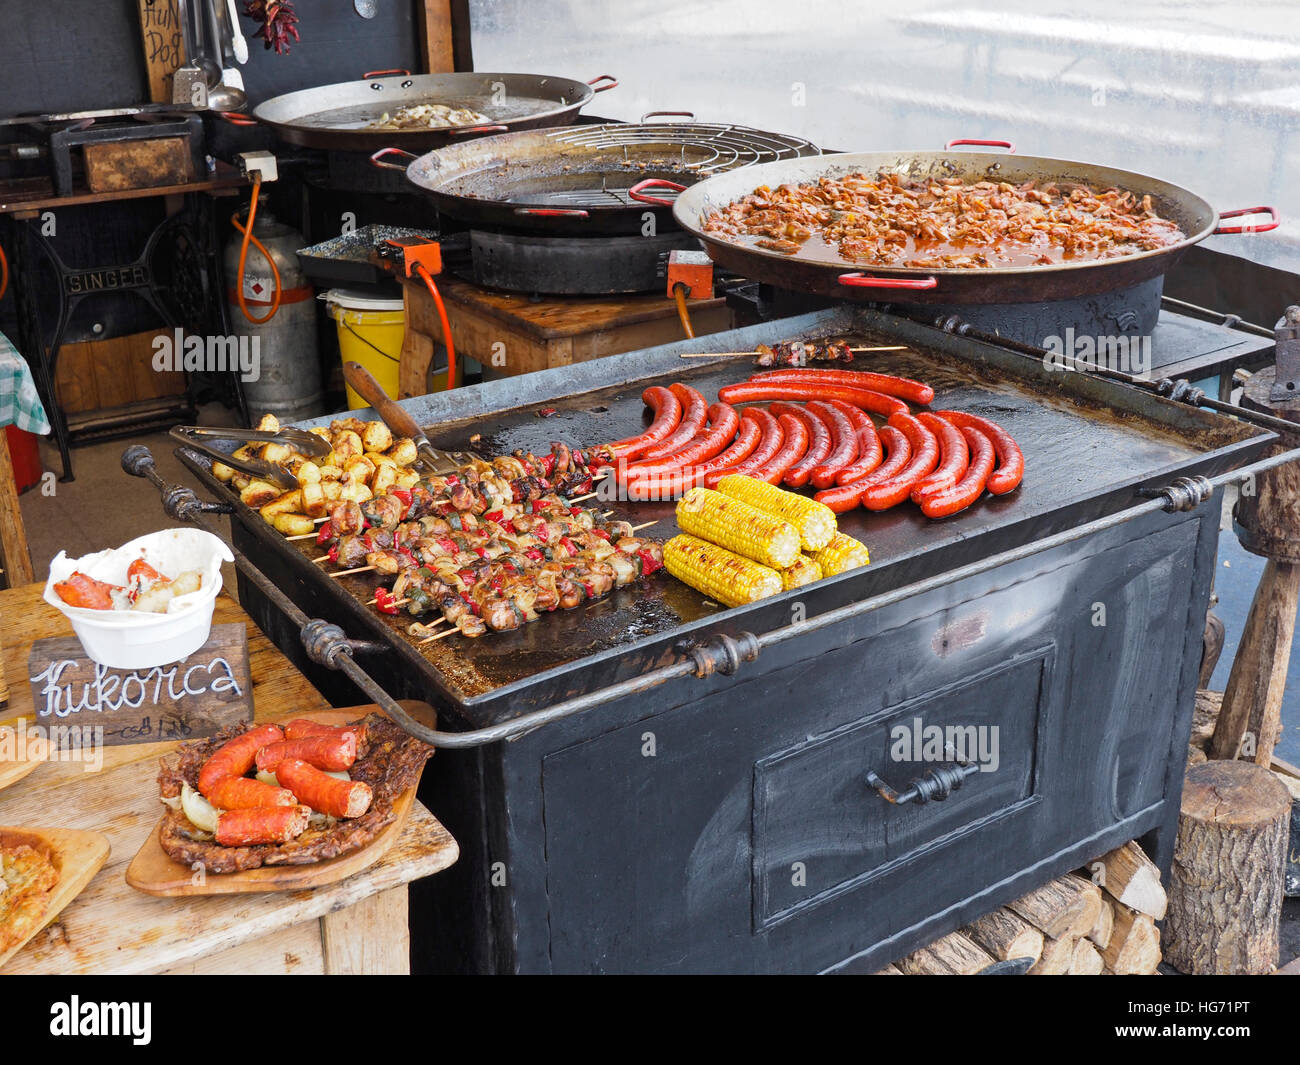 Typical Hungarian colorful street food including sausages, Shaslik, Goulash, and Kukorica (Mais). Stock Photo